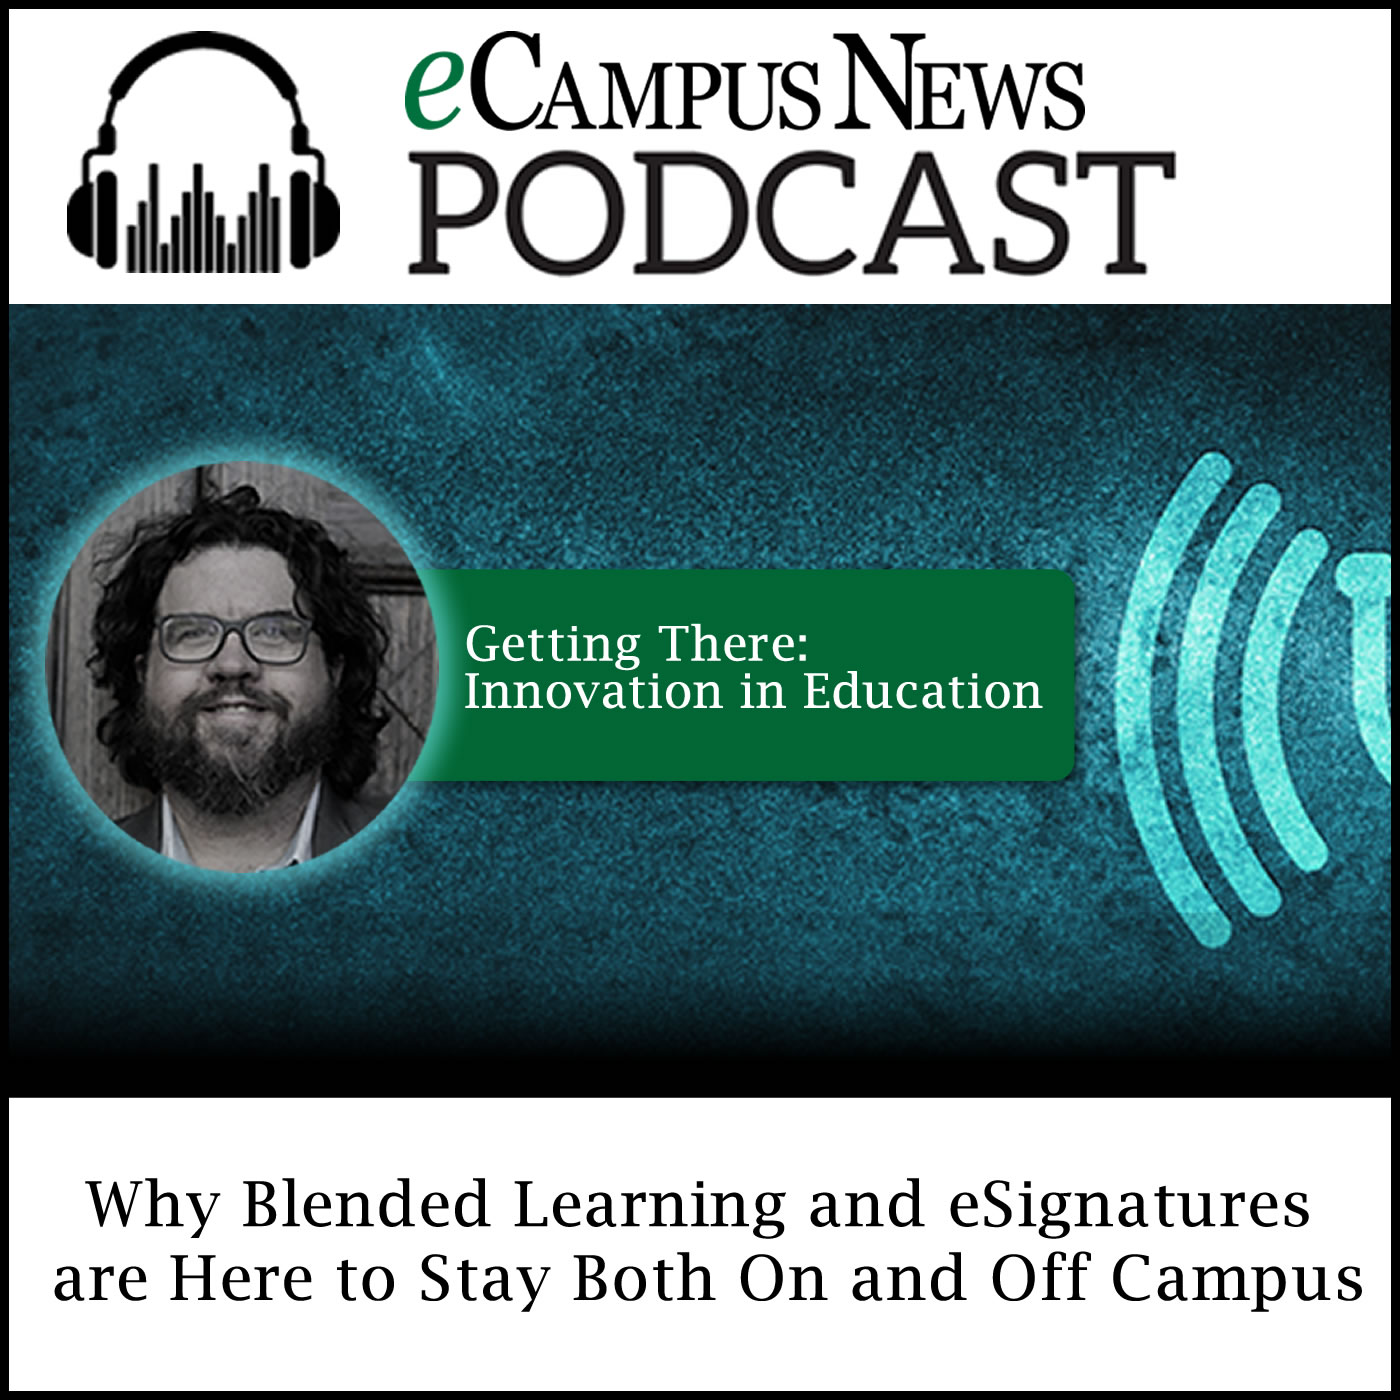 Blended Learning and eSignatures are Here to Stay--On and Off Campus